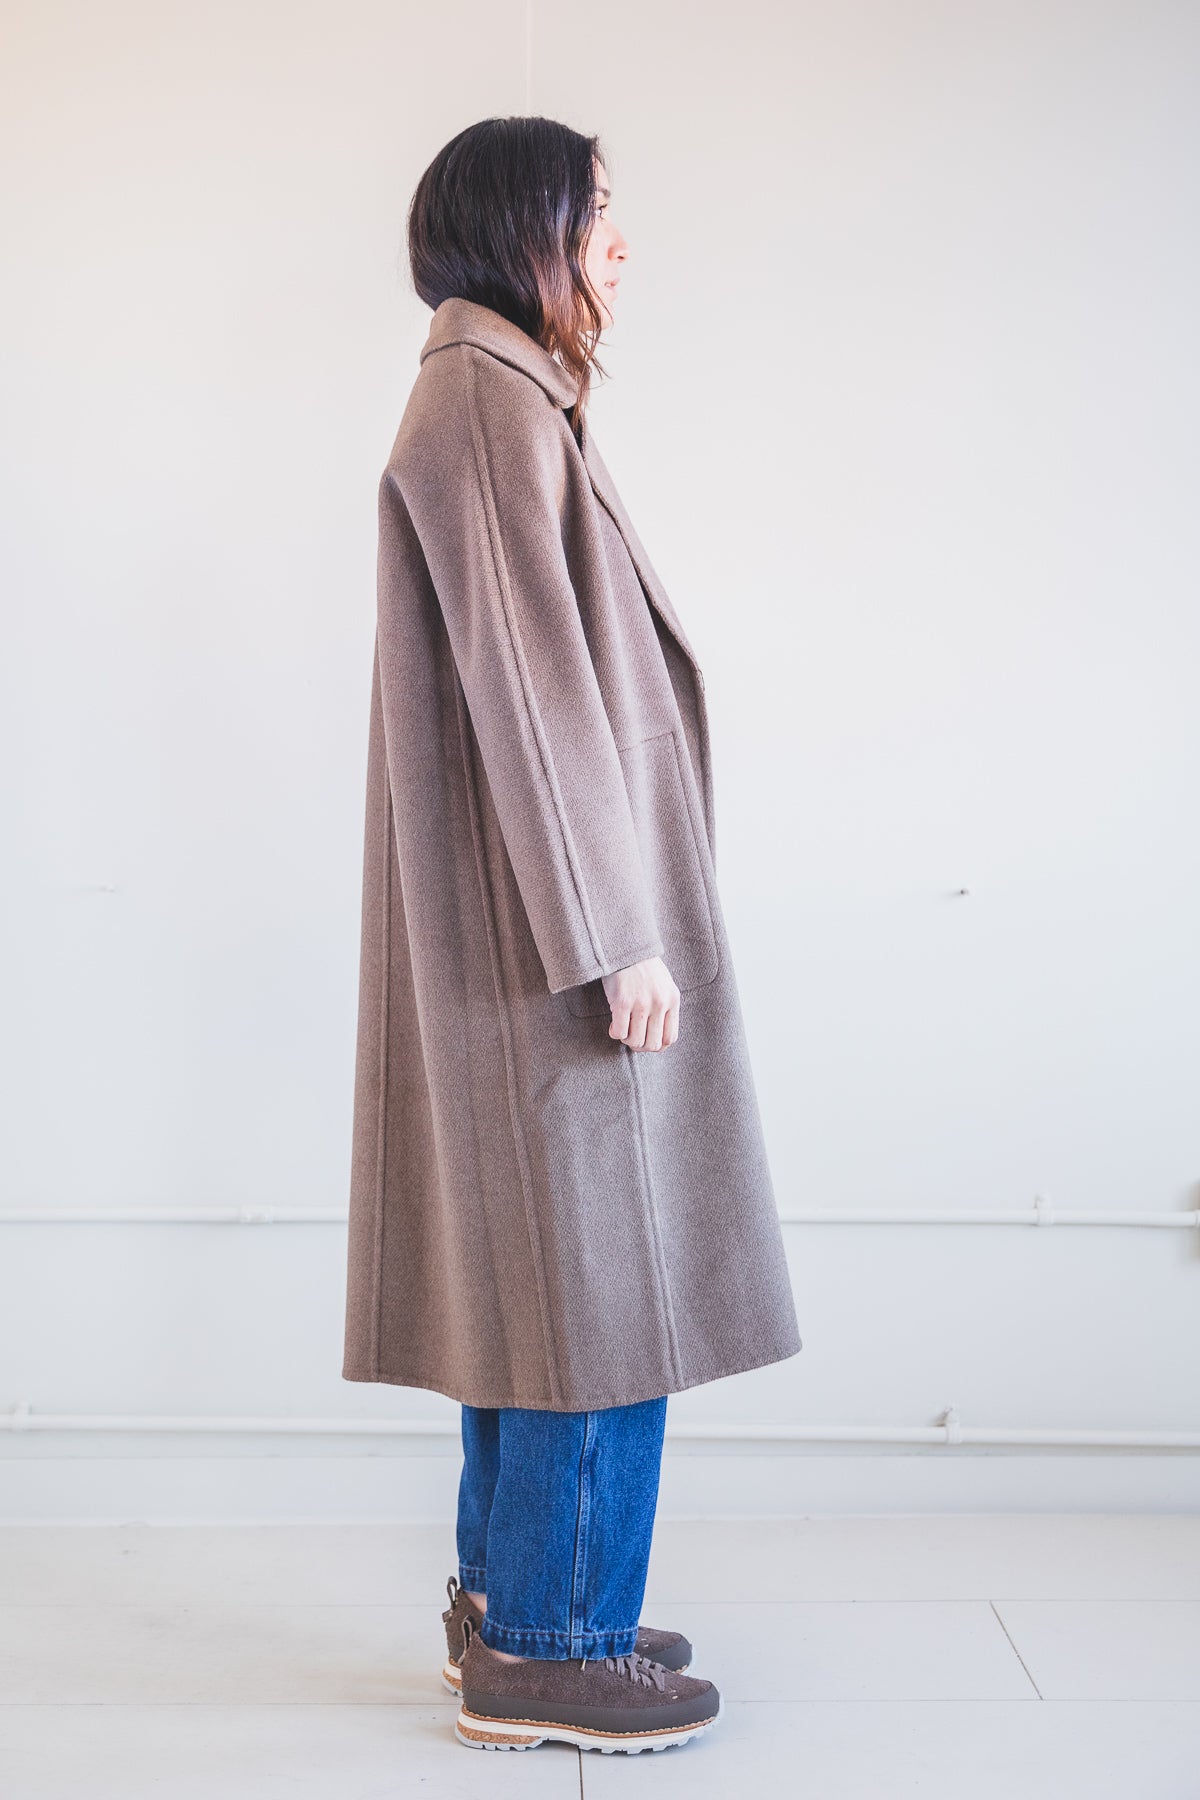 DOUBLE FACE LONG COAT IN UNDYED BROWN YAK WOOL